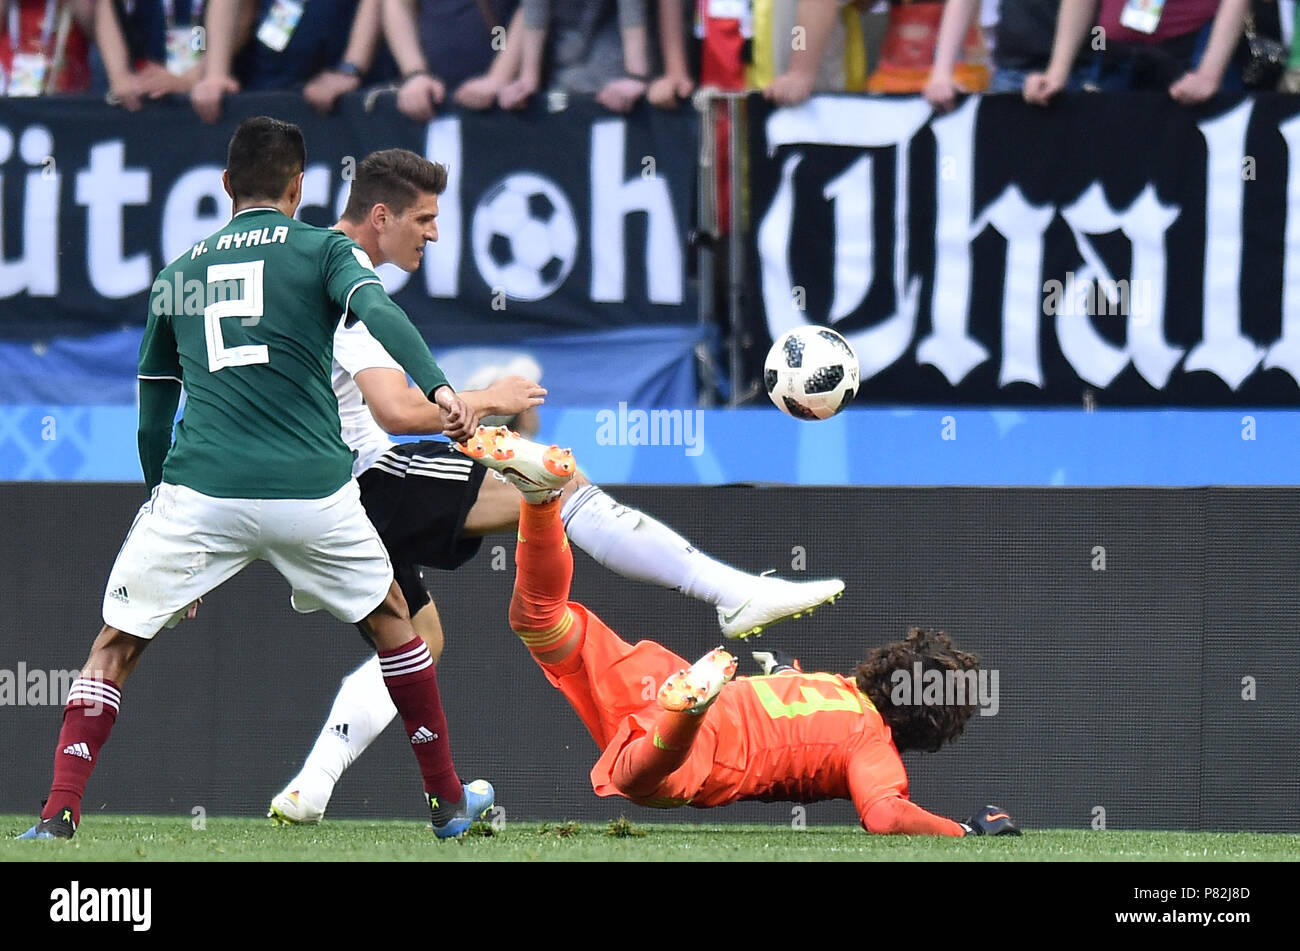 MOSCOW, RUSSIA - JUNE 17: Mario Gomez of Germany competes with Guillermo Ochoa of Mexico during the 2018 FIFA World Cup Russia group F match between Germany and Mexico at Luzhniki Stadium on June 17, 2018 in Moscow, Russia. (Photo by Lukasz Laskowski/PressFocus/MB Media) Stock Photo